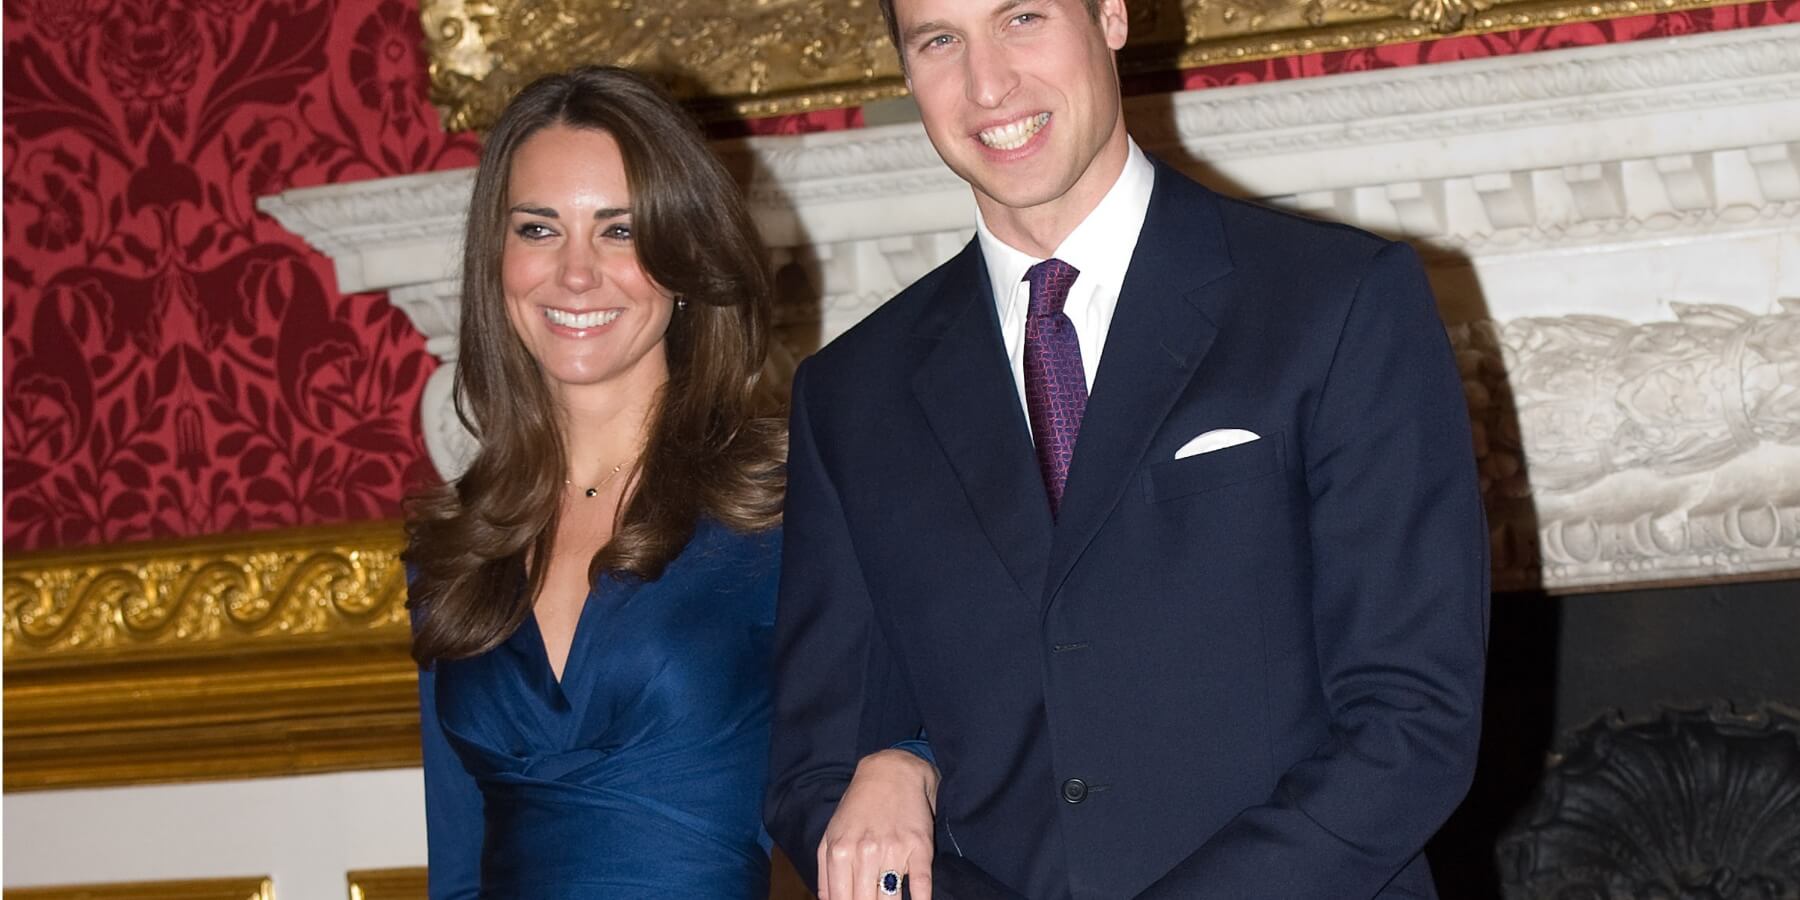 Kate Middleton and Prince William upon announcing their engagement in 2010.